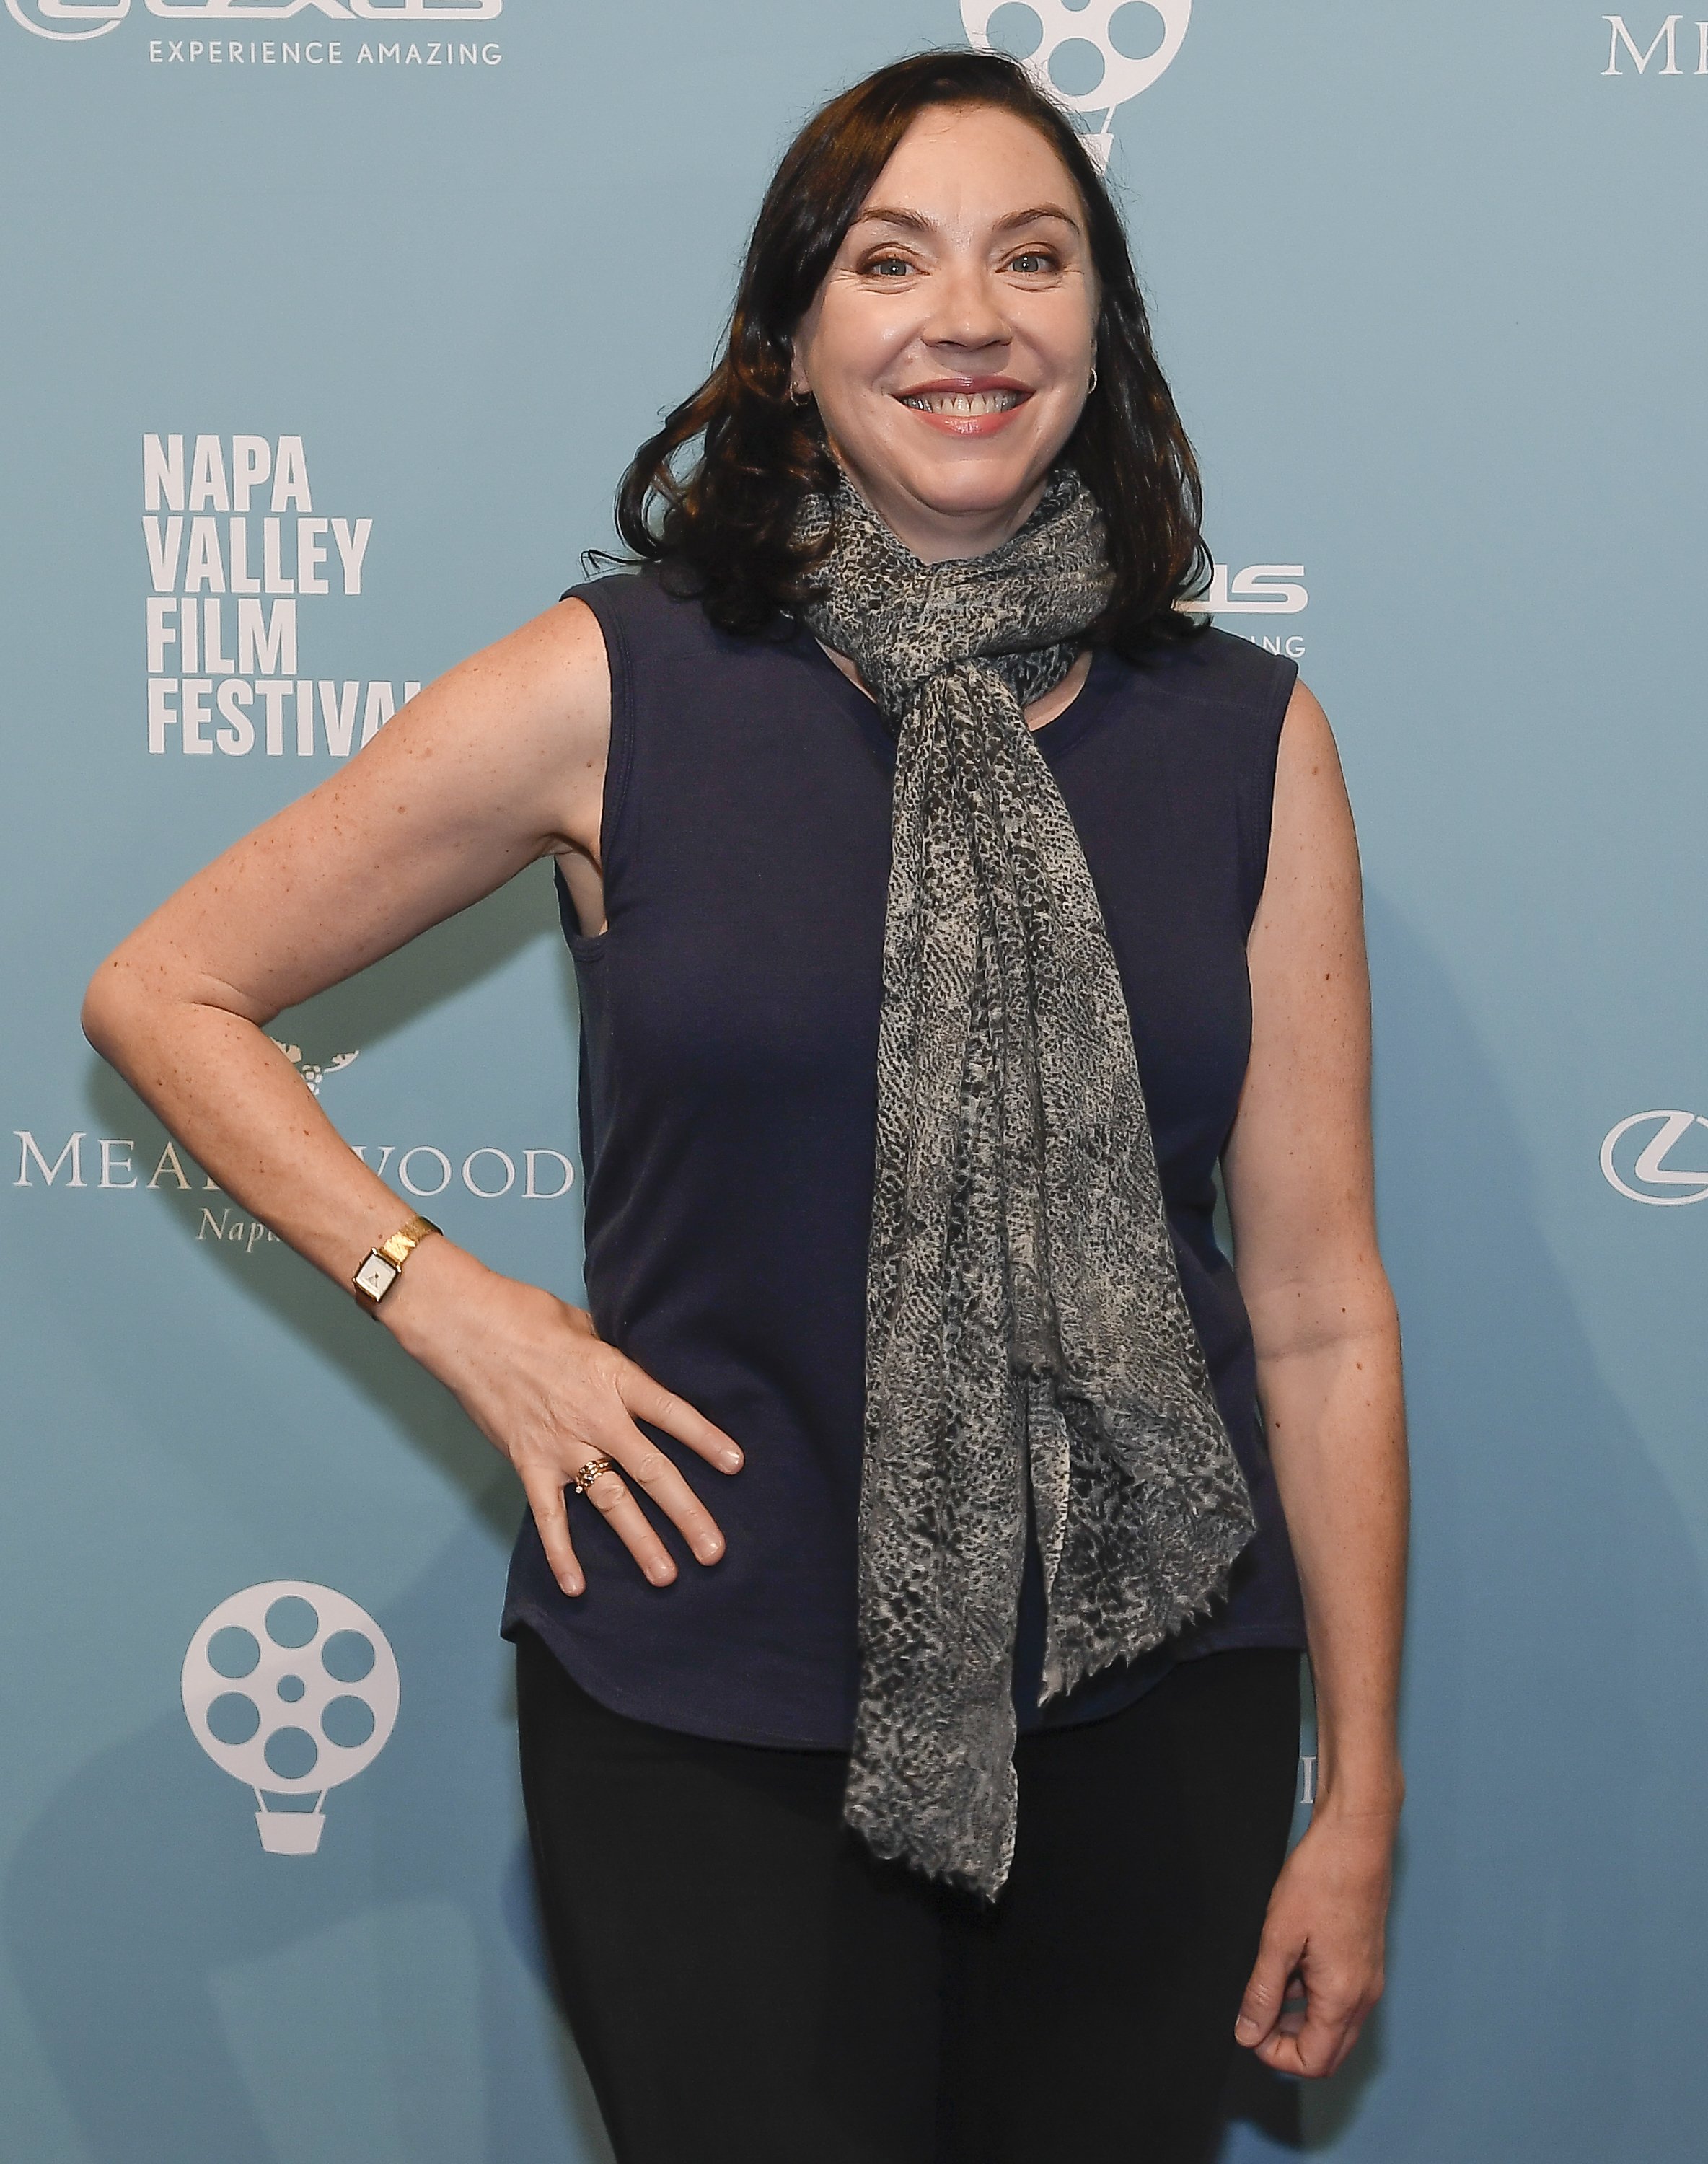 Stephanie Courtney at the 2018 Napa Valley Film Festival on November 7, 2018, in Napa | Source: Getty Images